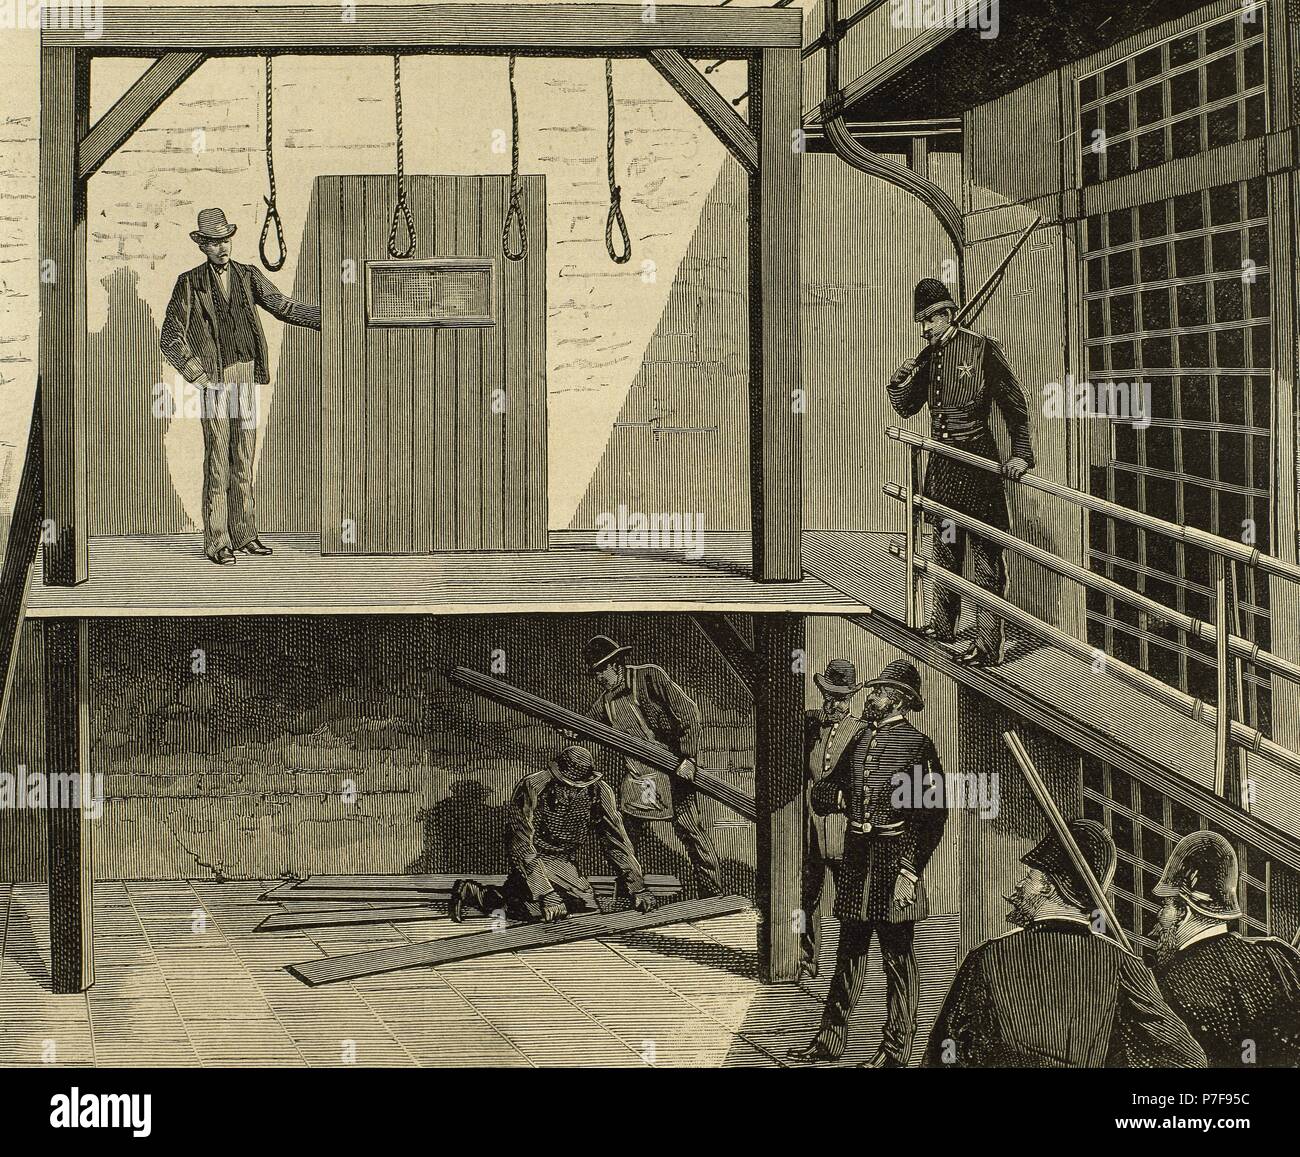 Albums 101+ Images the haymarket affair resulted in the hanging of four convicted anarchists. Stunning